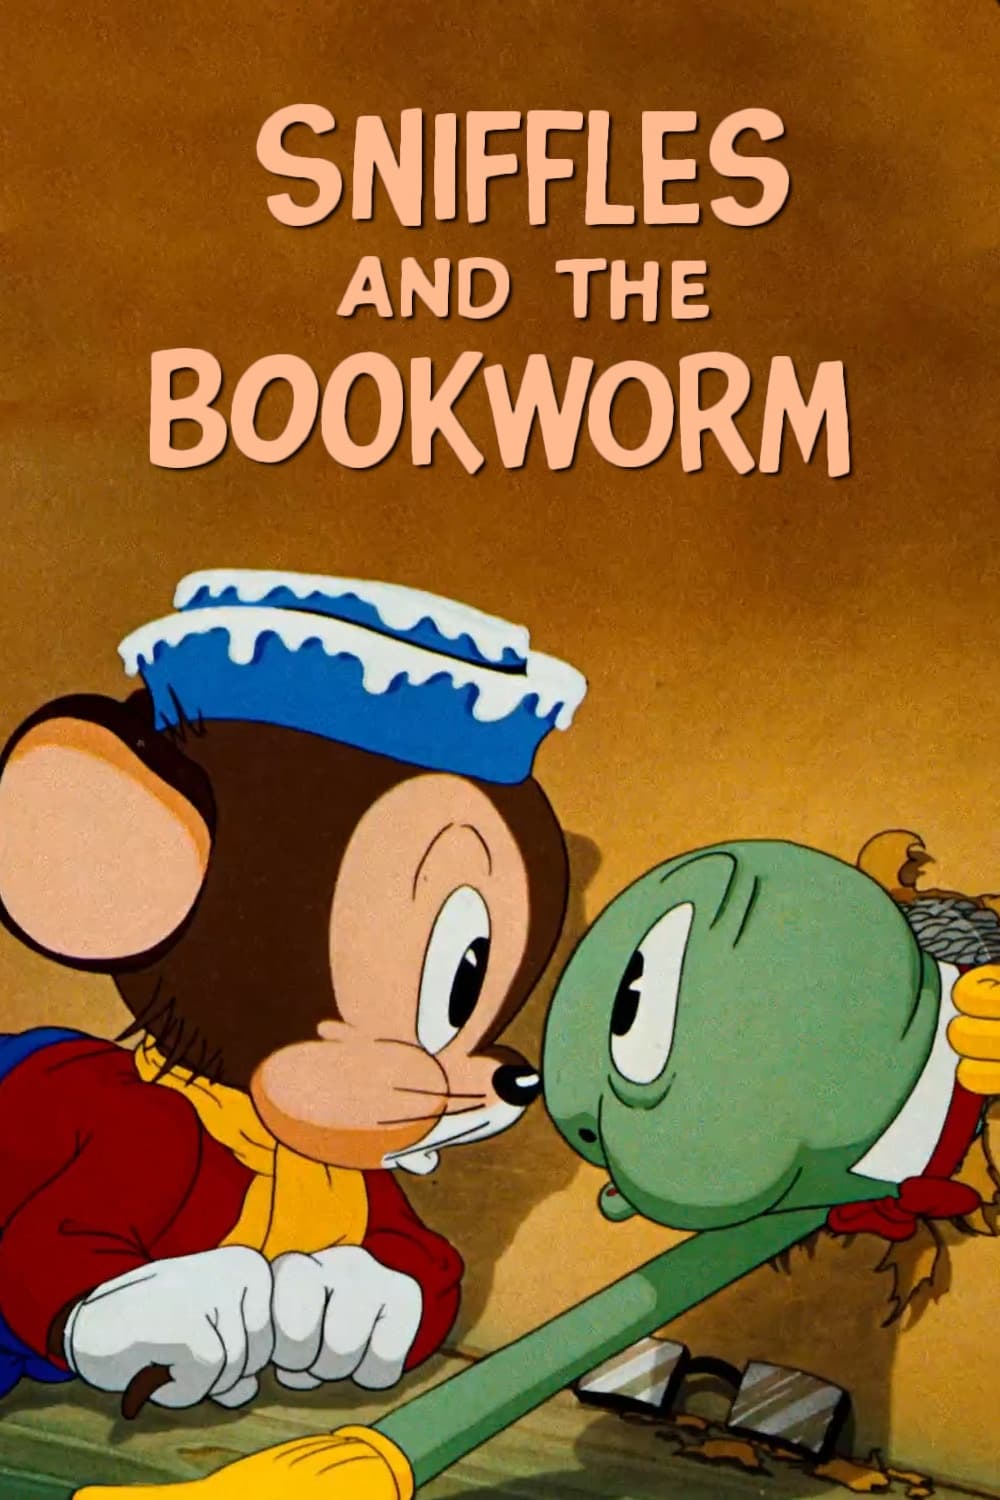 Sniffles and the Bookworm (1939)